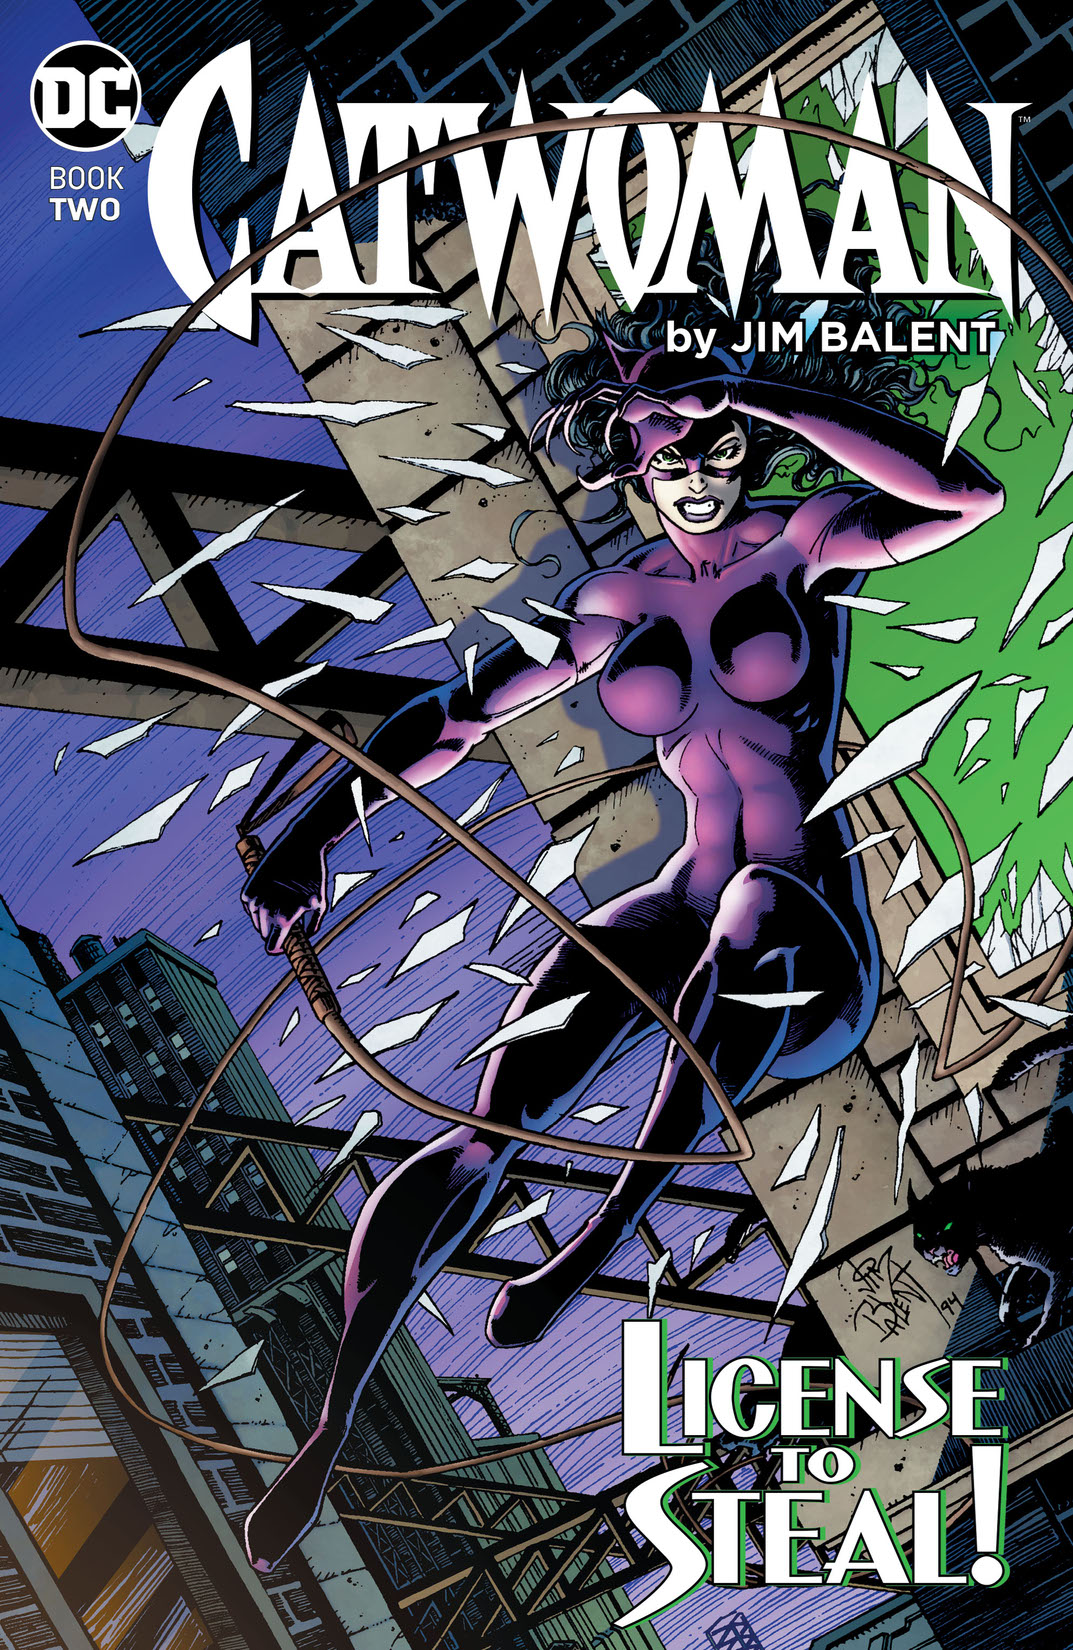 Catwoman by Jim Balent Book Two preview images